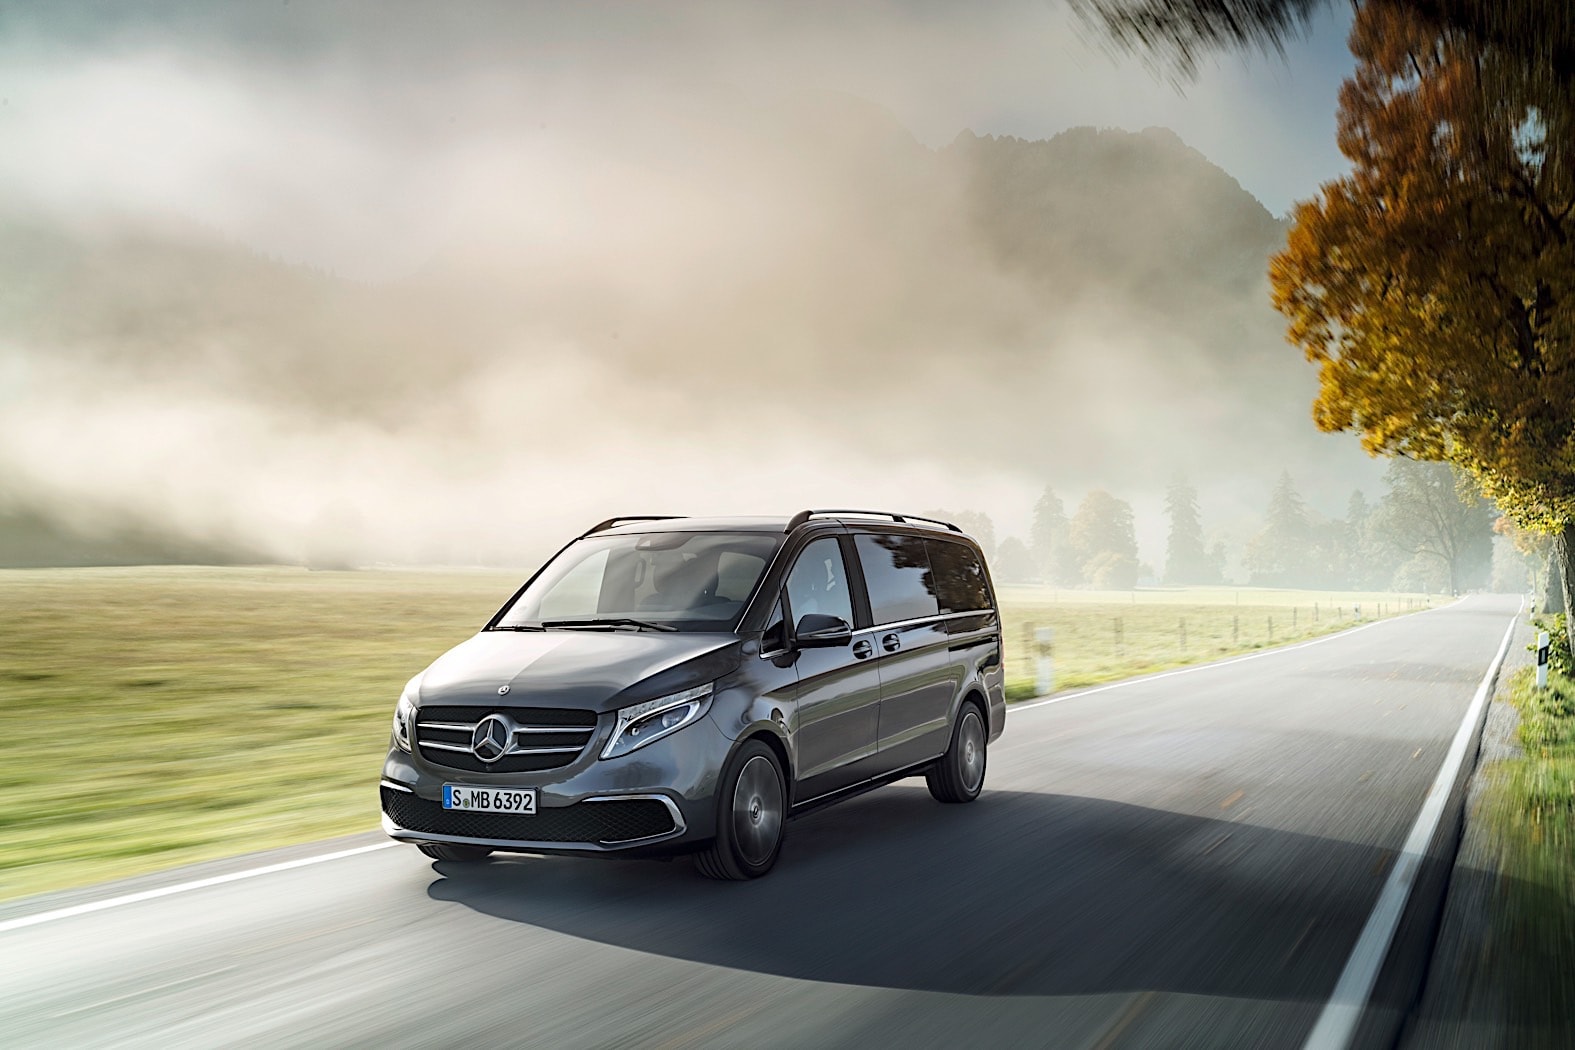 Facelifted Mercedes Vito van breaks cover with extra safety kit